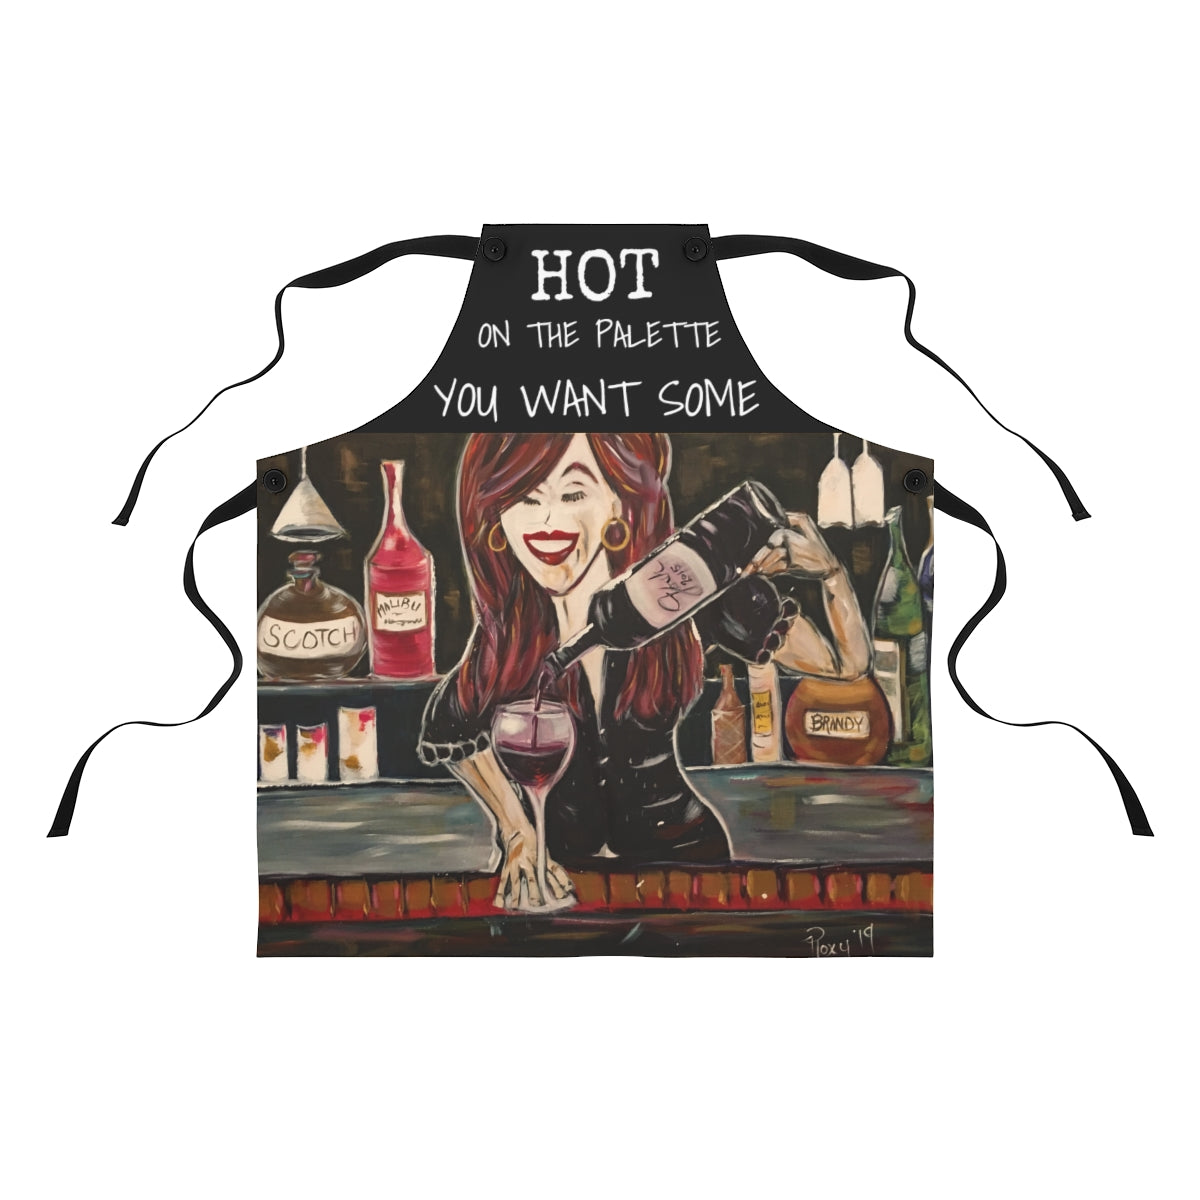 HOT on the Palette, You Want Some  Sexy Bartender   Kitchen Apron